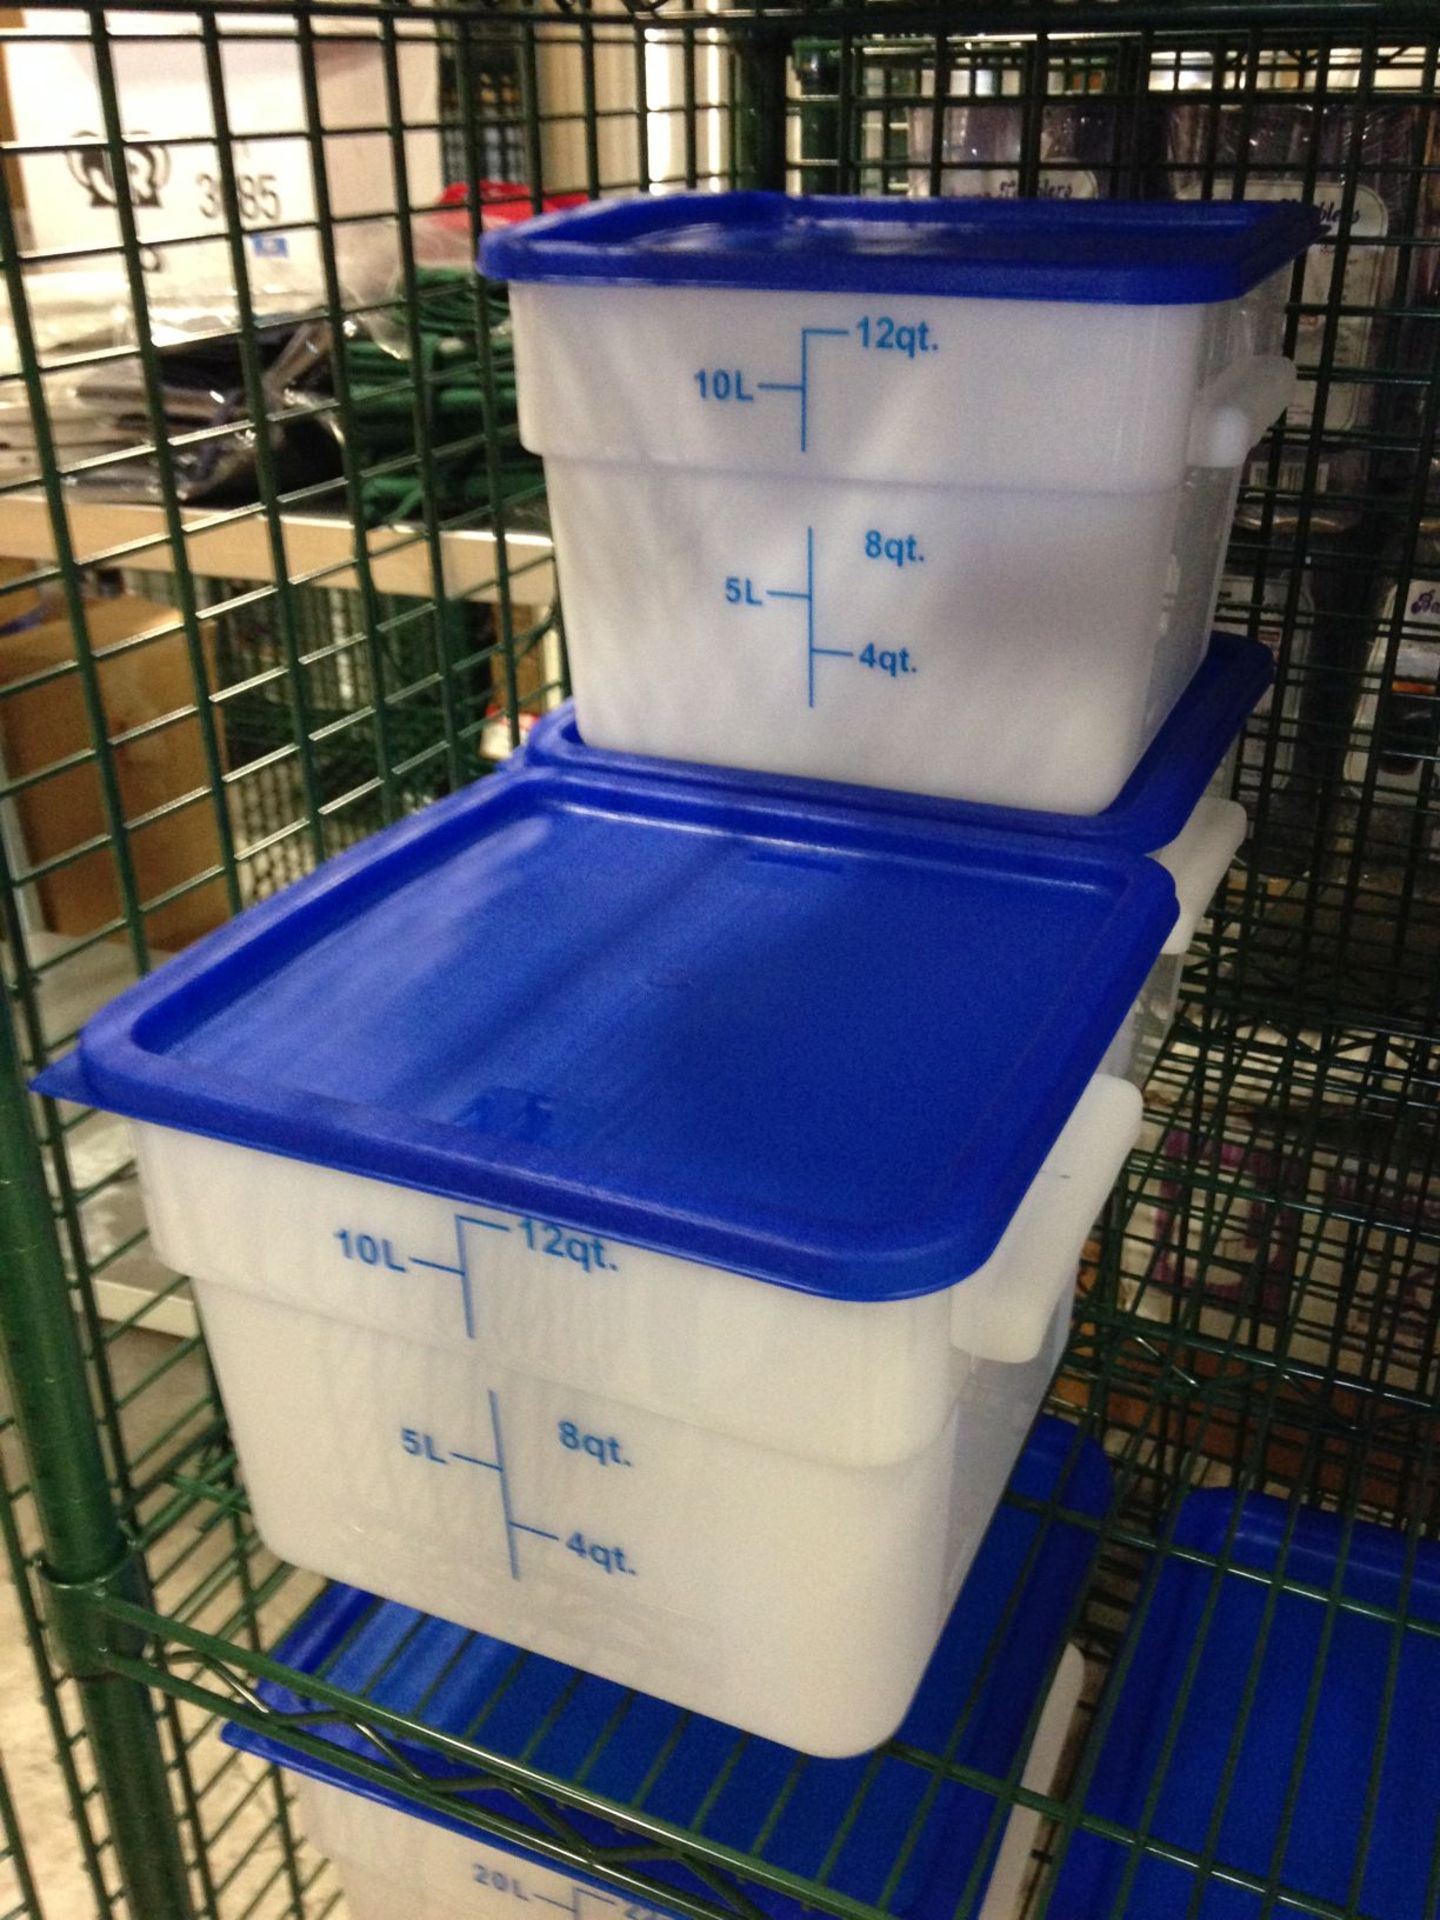 12qt Ingredient Bins with Lids - Lot of 3